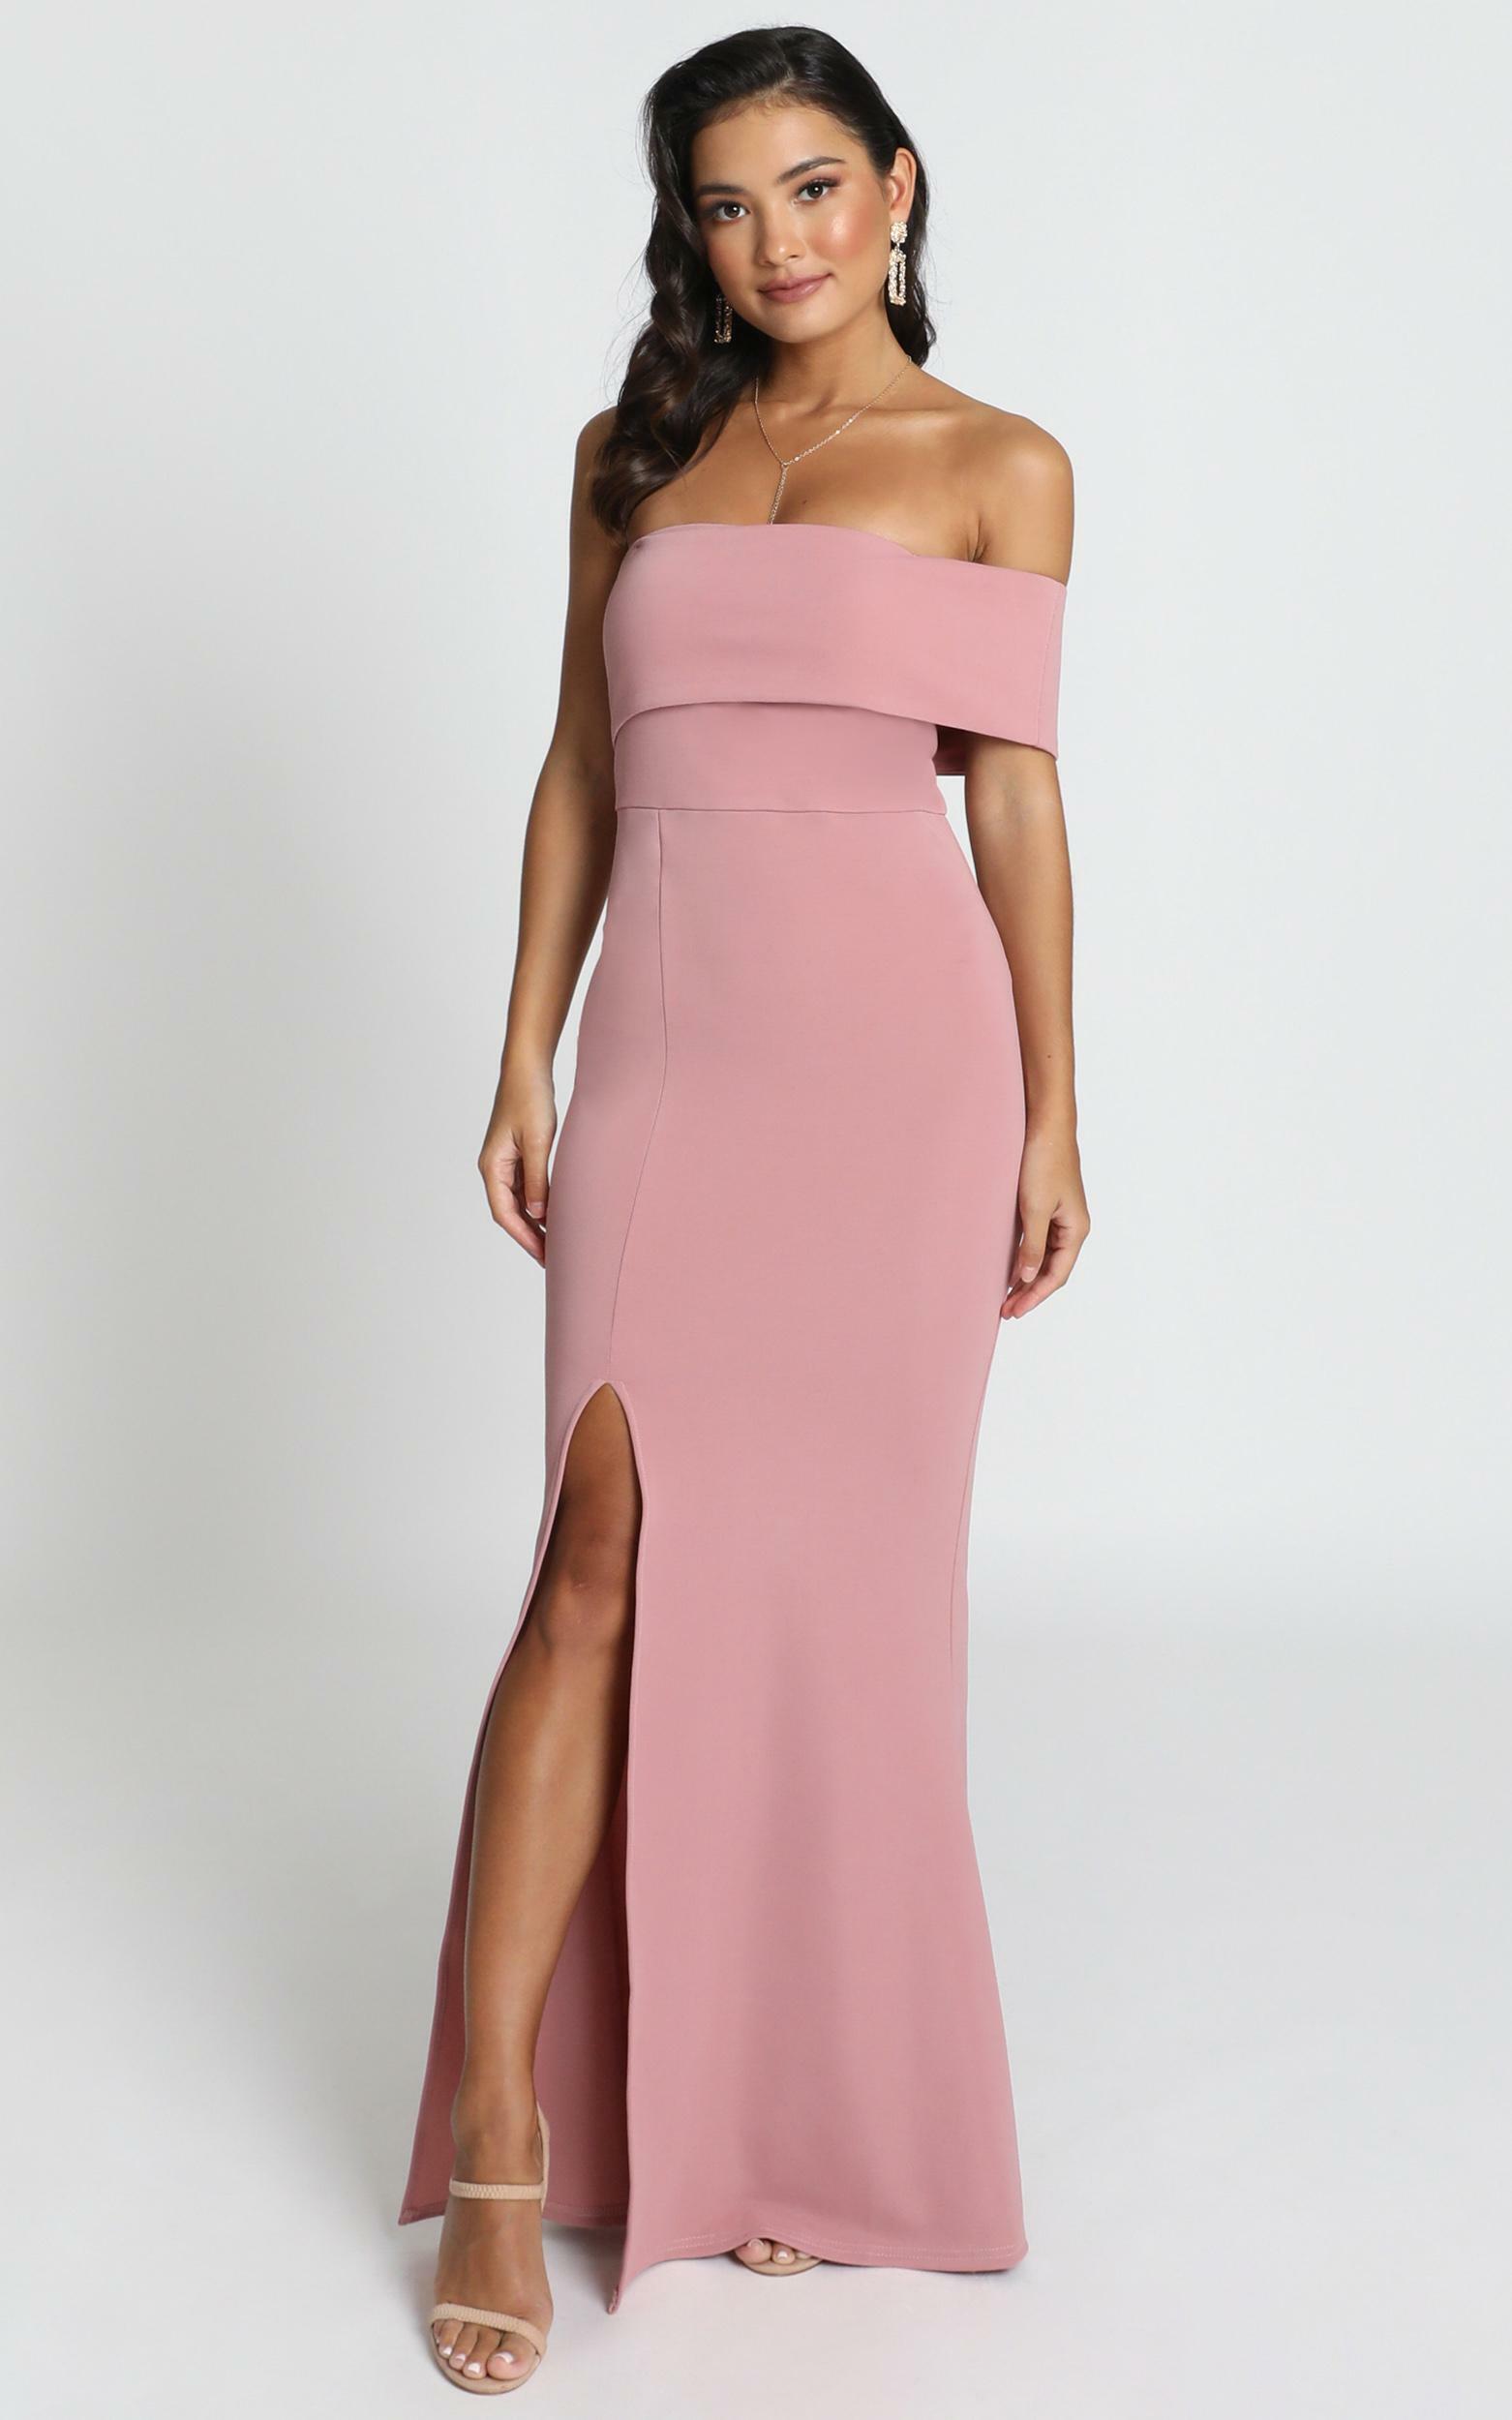 Glamour Girl Maxi Dress in Dusty Rose - 20, PNK3, hi-res image number null